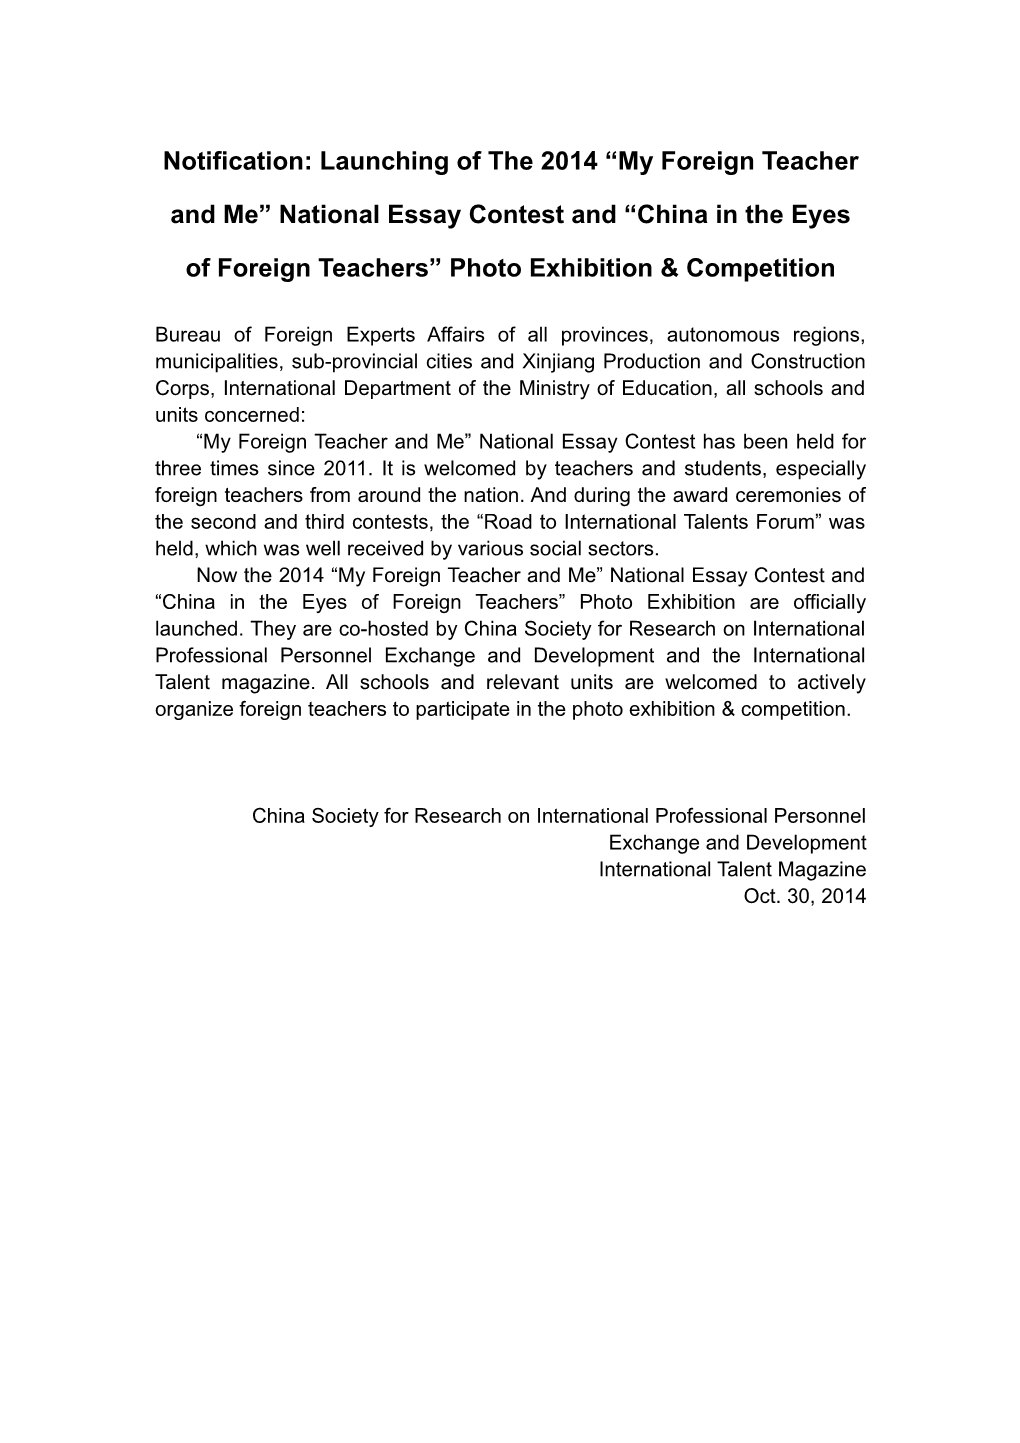 Notification: Launching of the 2014 My Foreign Teacher and Me National Essay Contest And